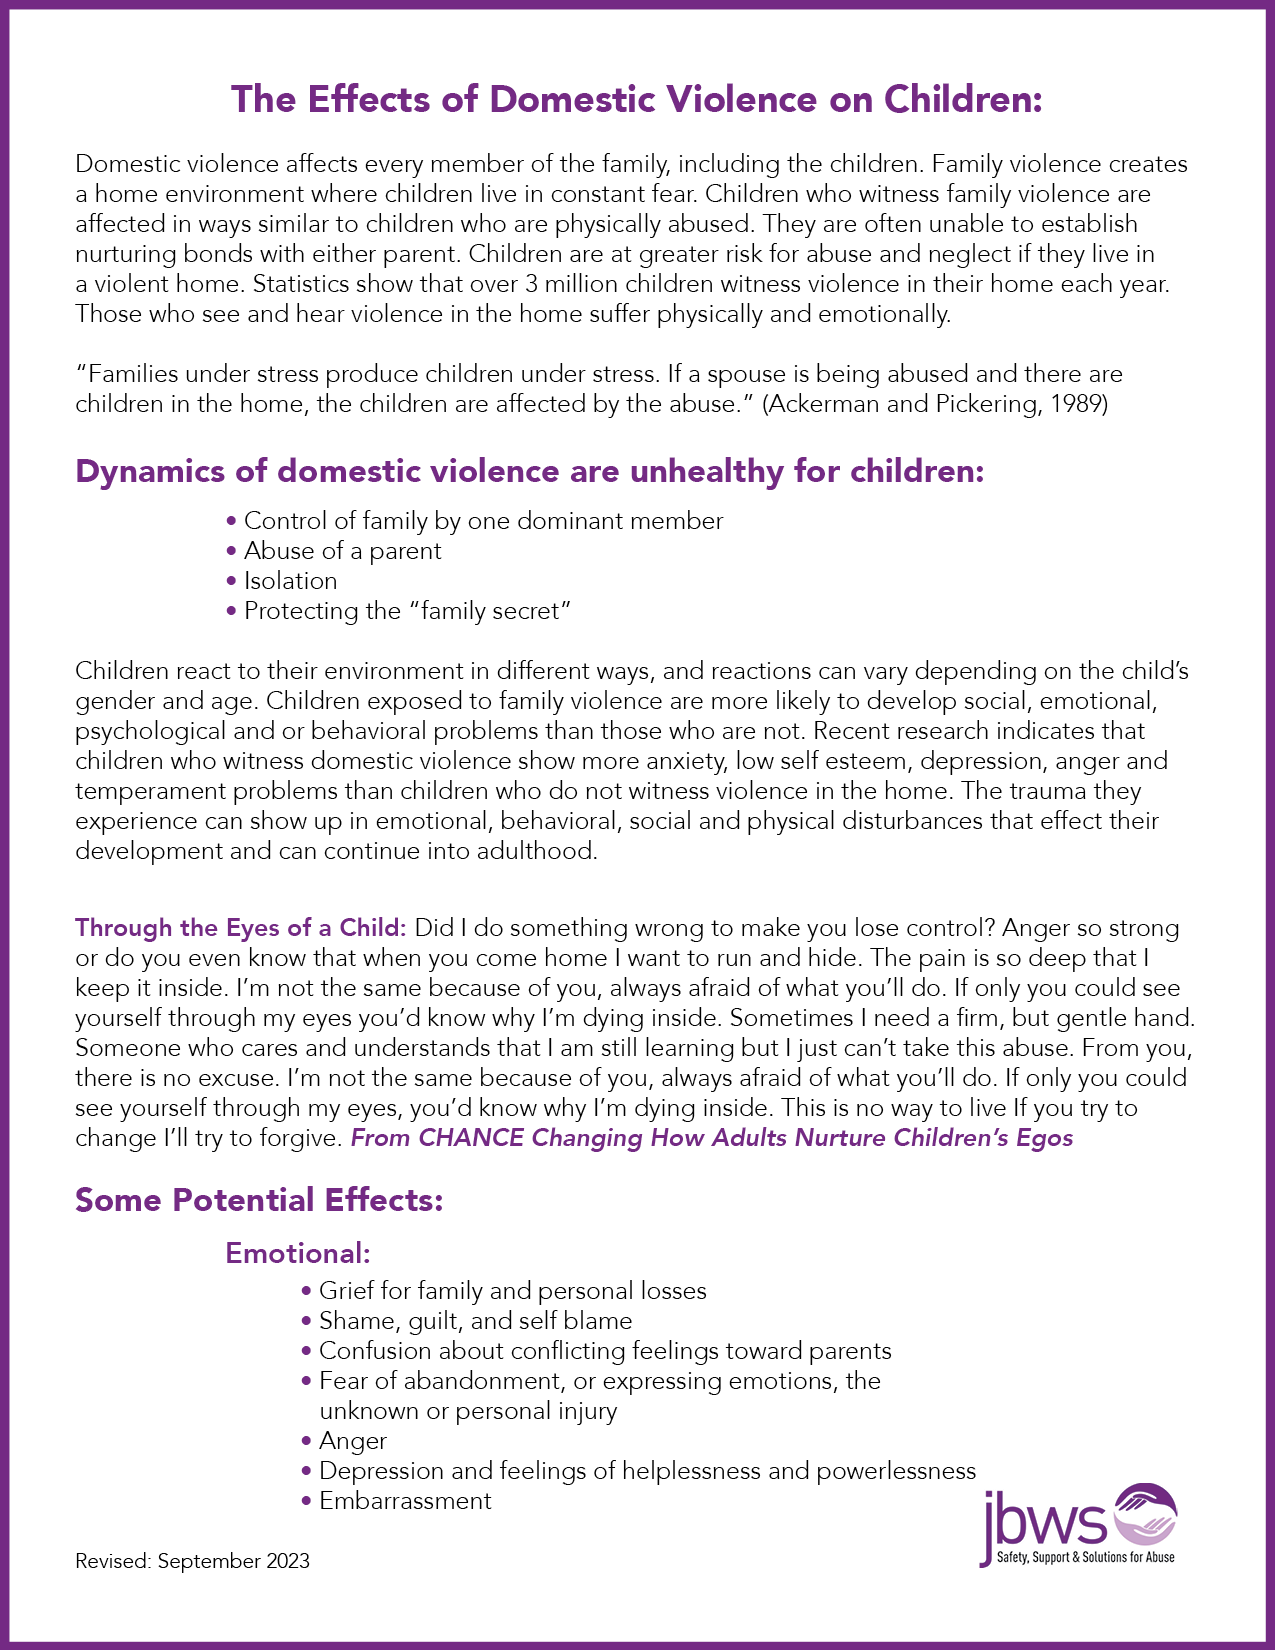 The Effects of Domestic Violence on Children-